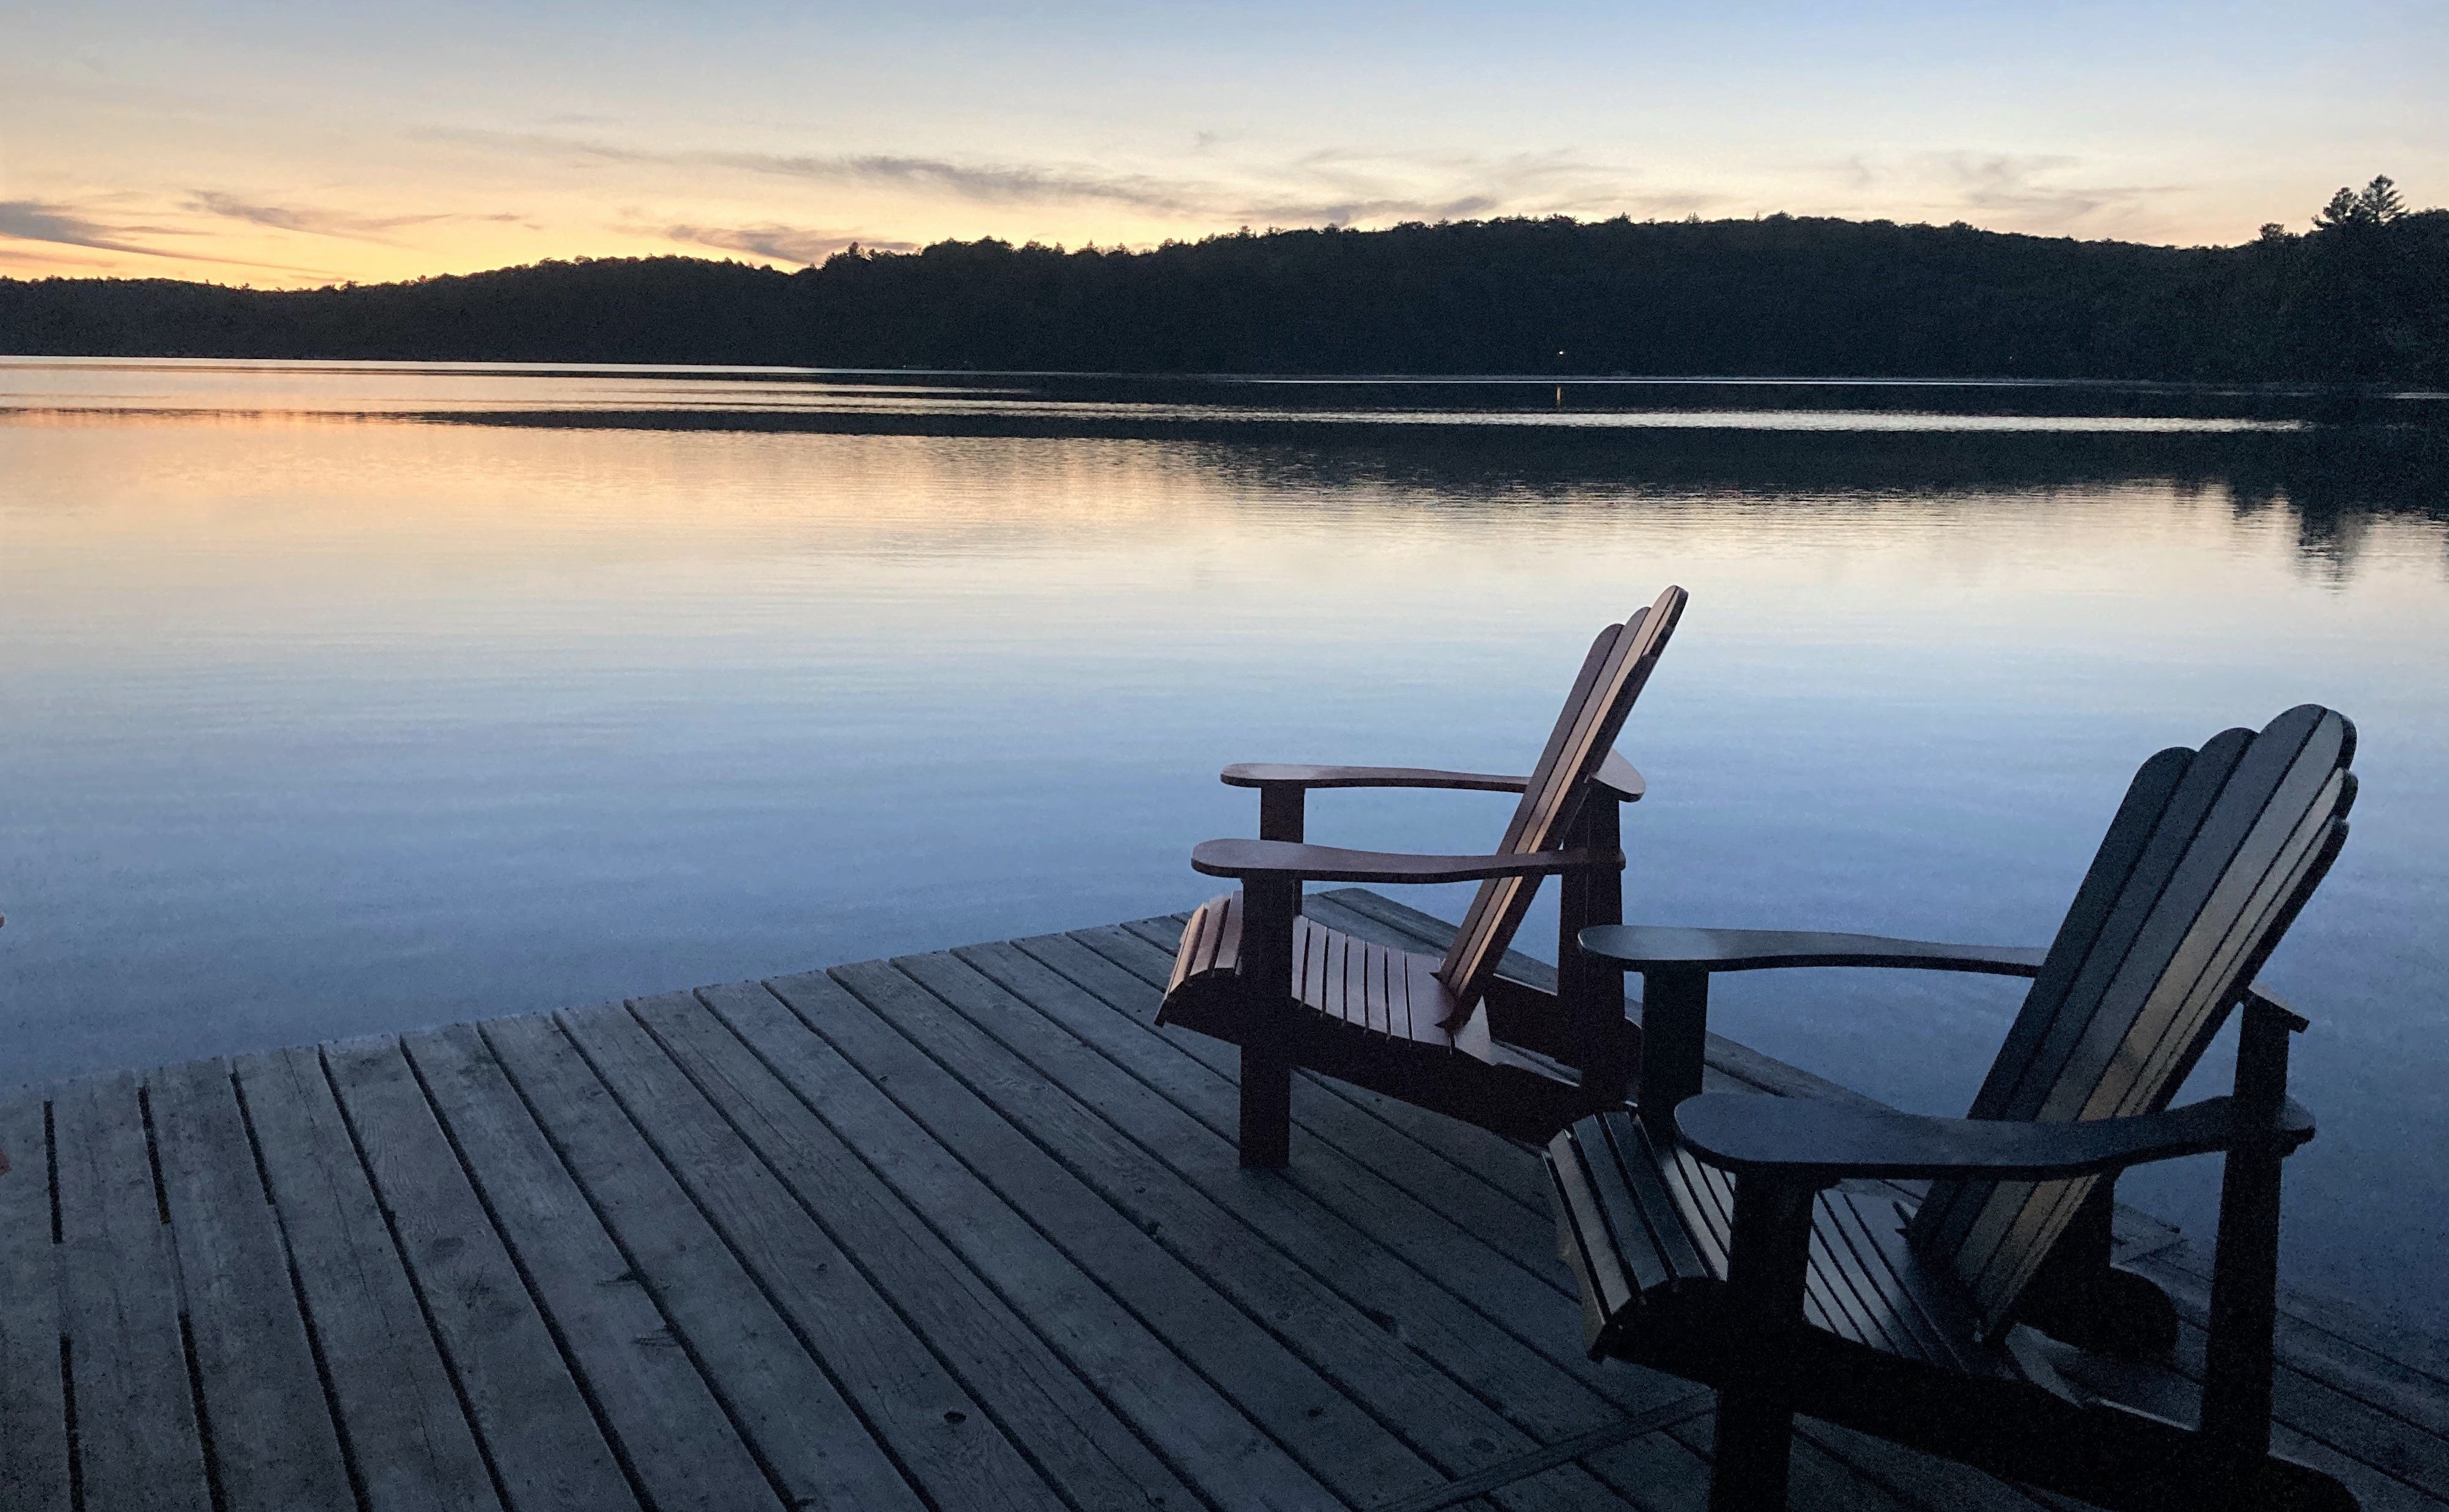 Adirondack chairs on dock by the lake at sunset